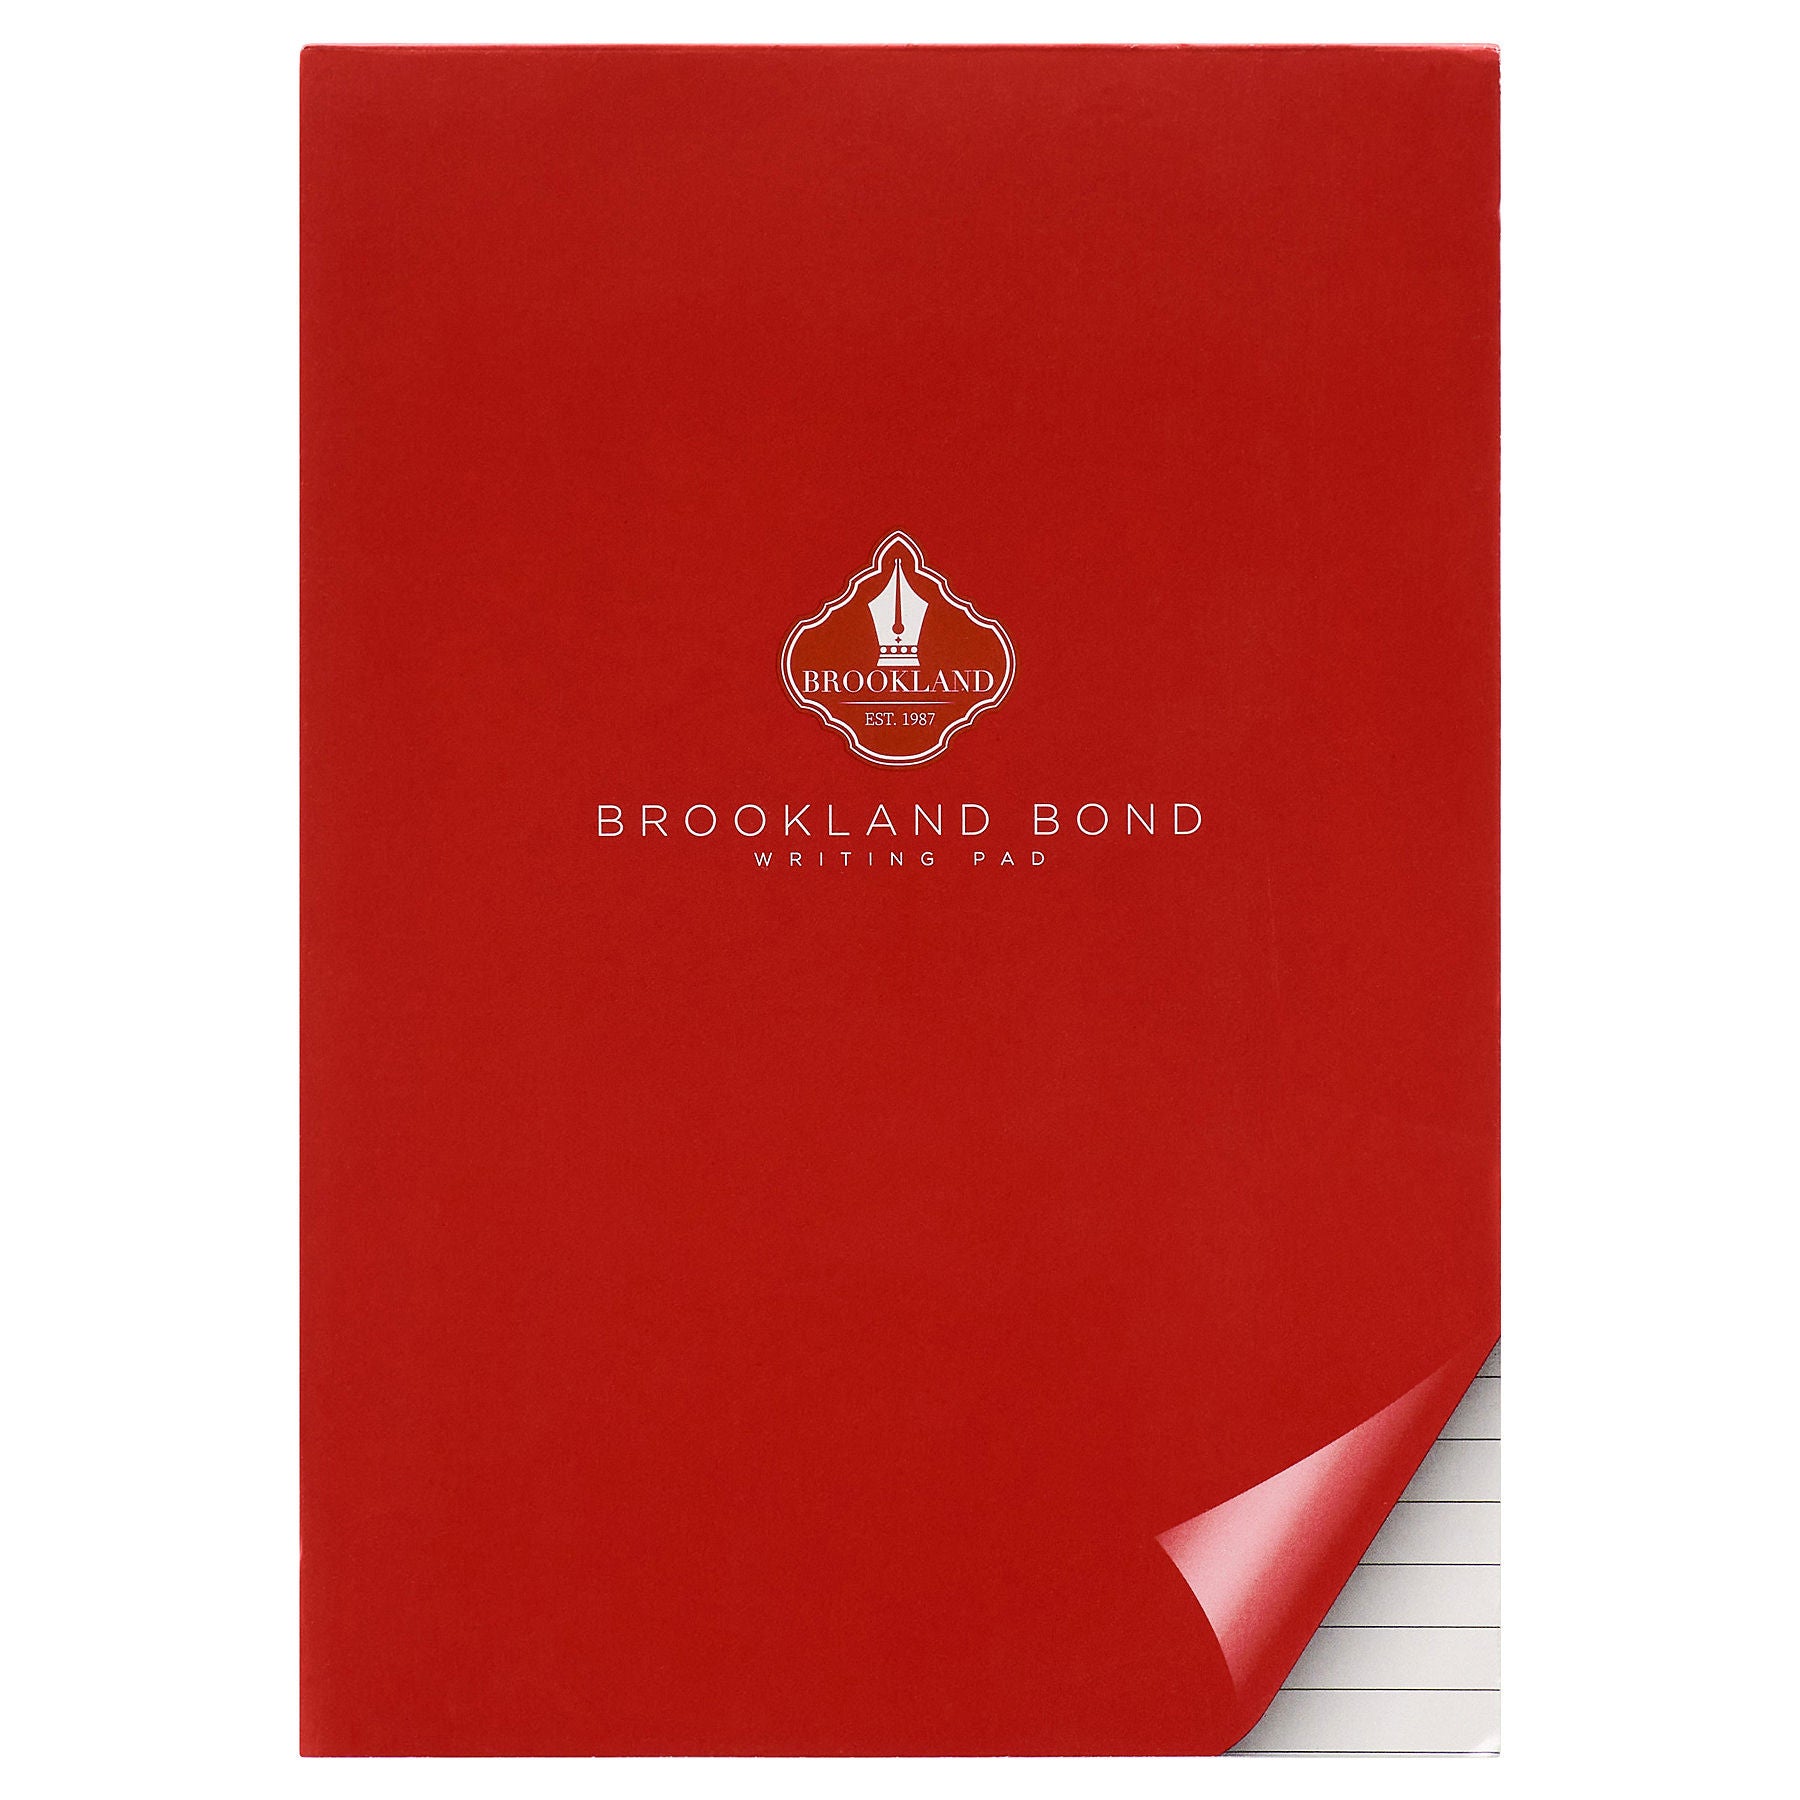 Brookland Bond A5 Writing Pad 100 Sheets - White Ruled by penny black